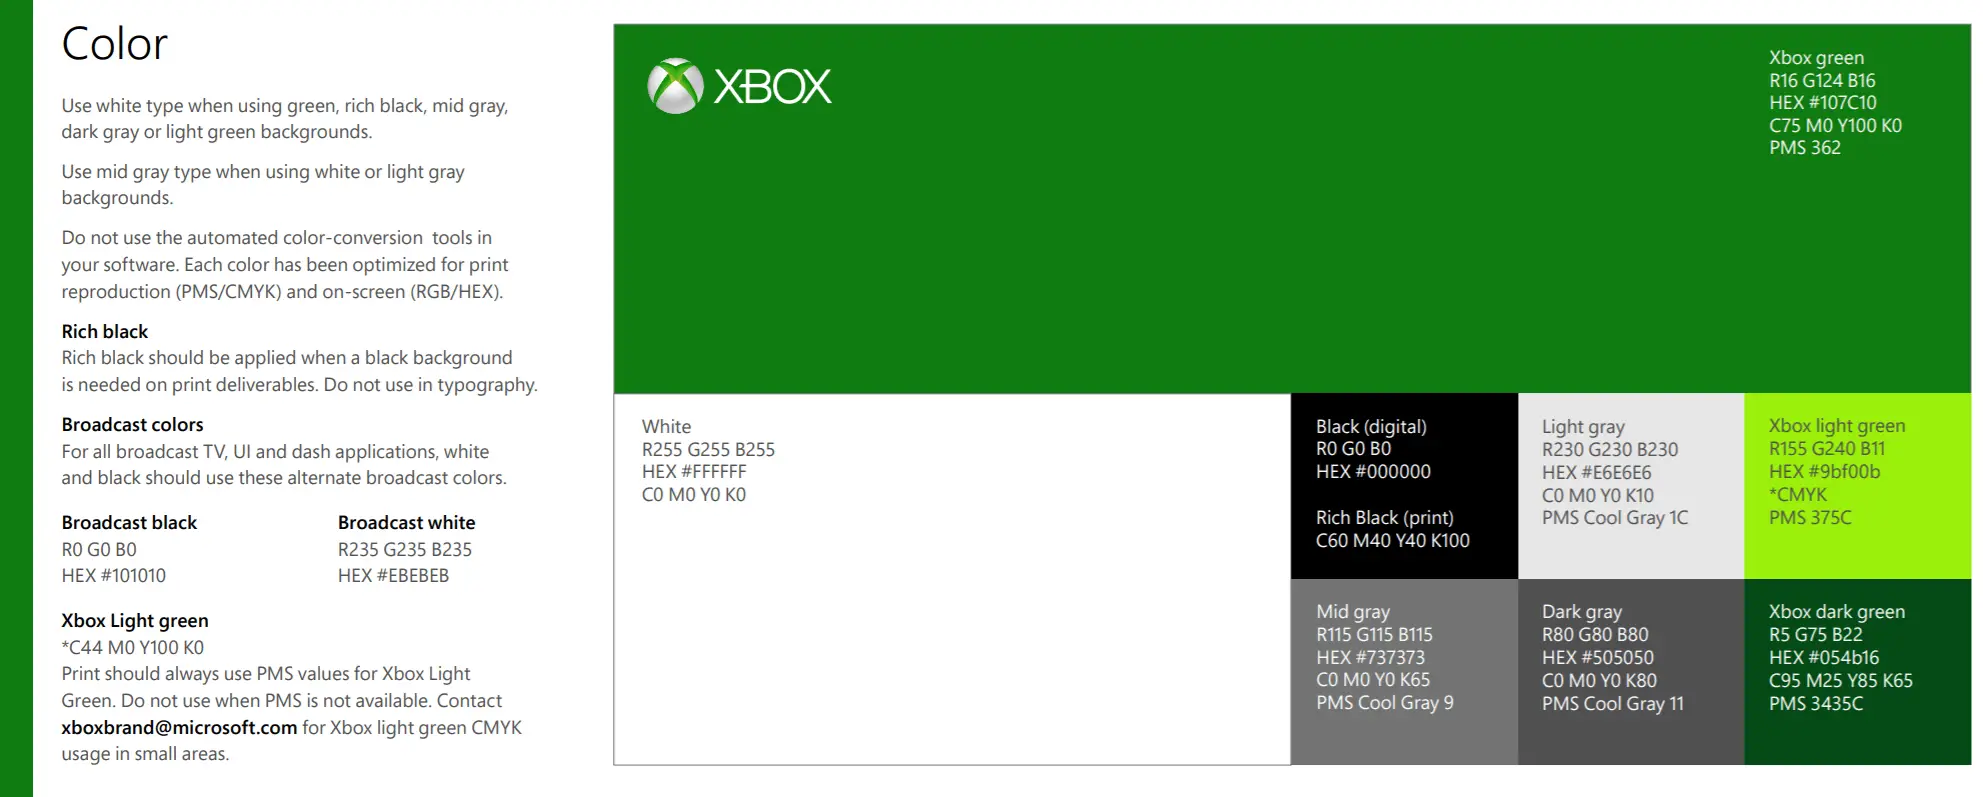 Xbox brand usage guidelines